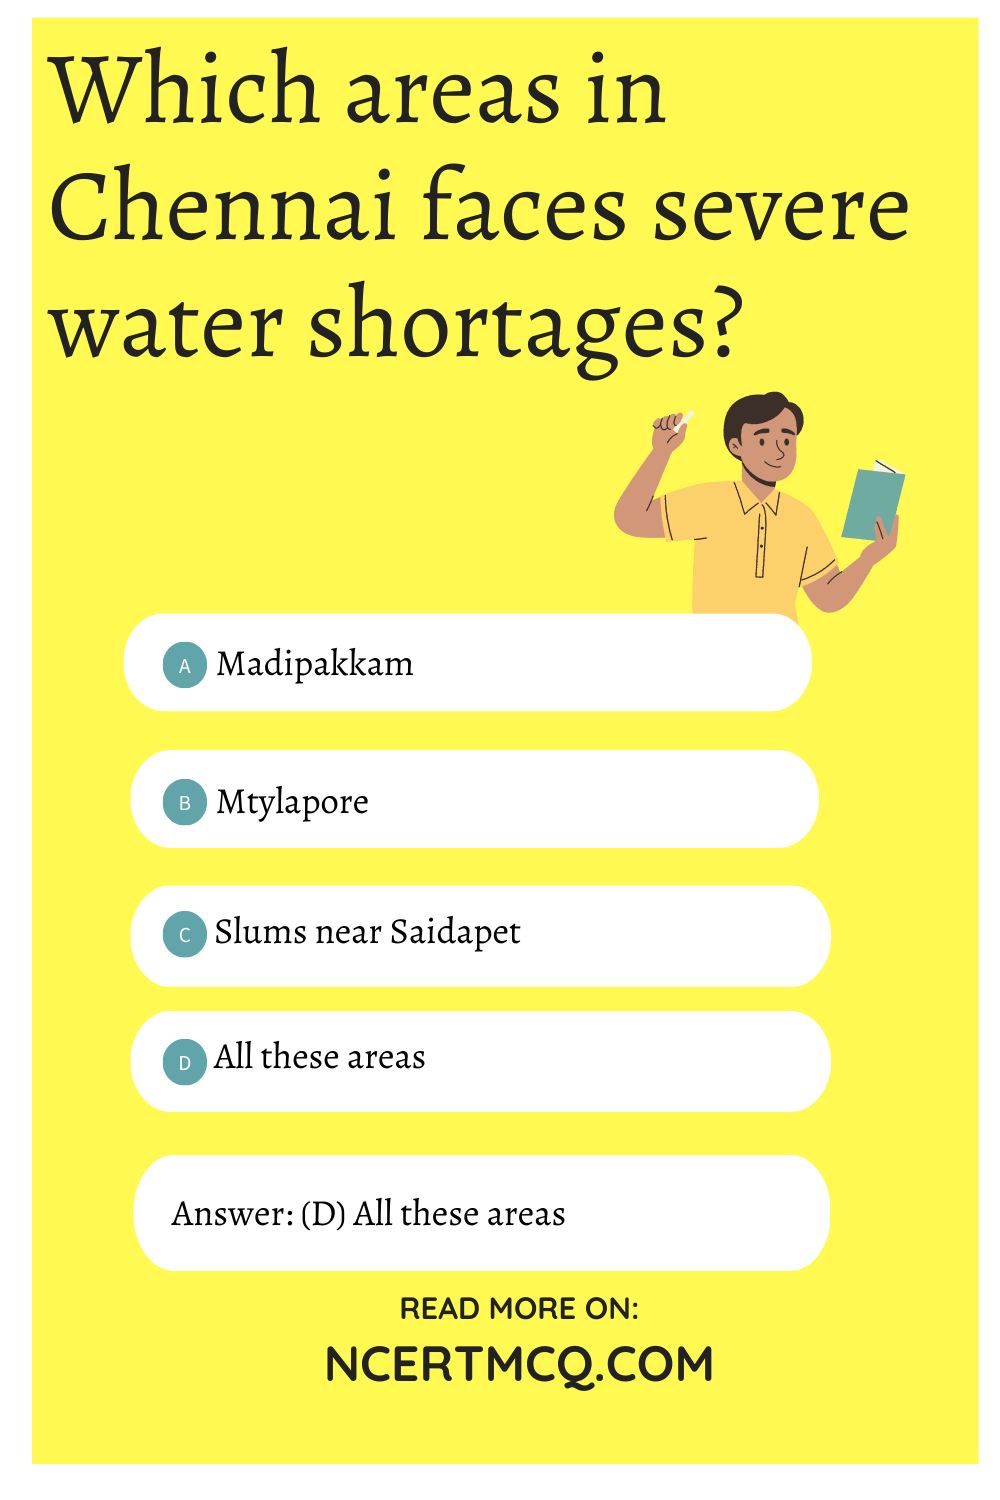 Which areas in Chennai faces severe water shortages?